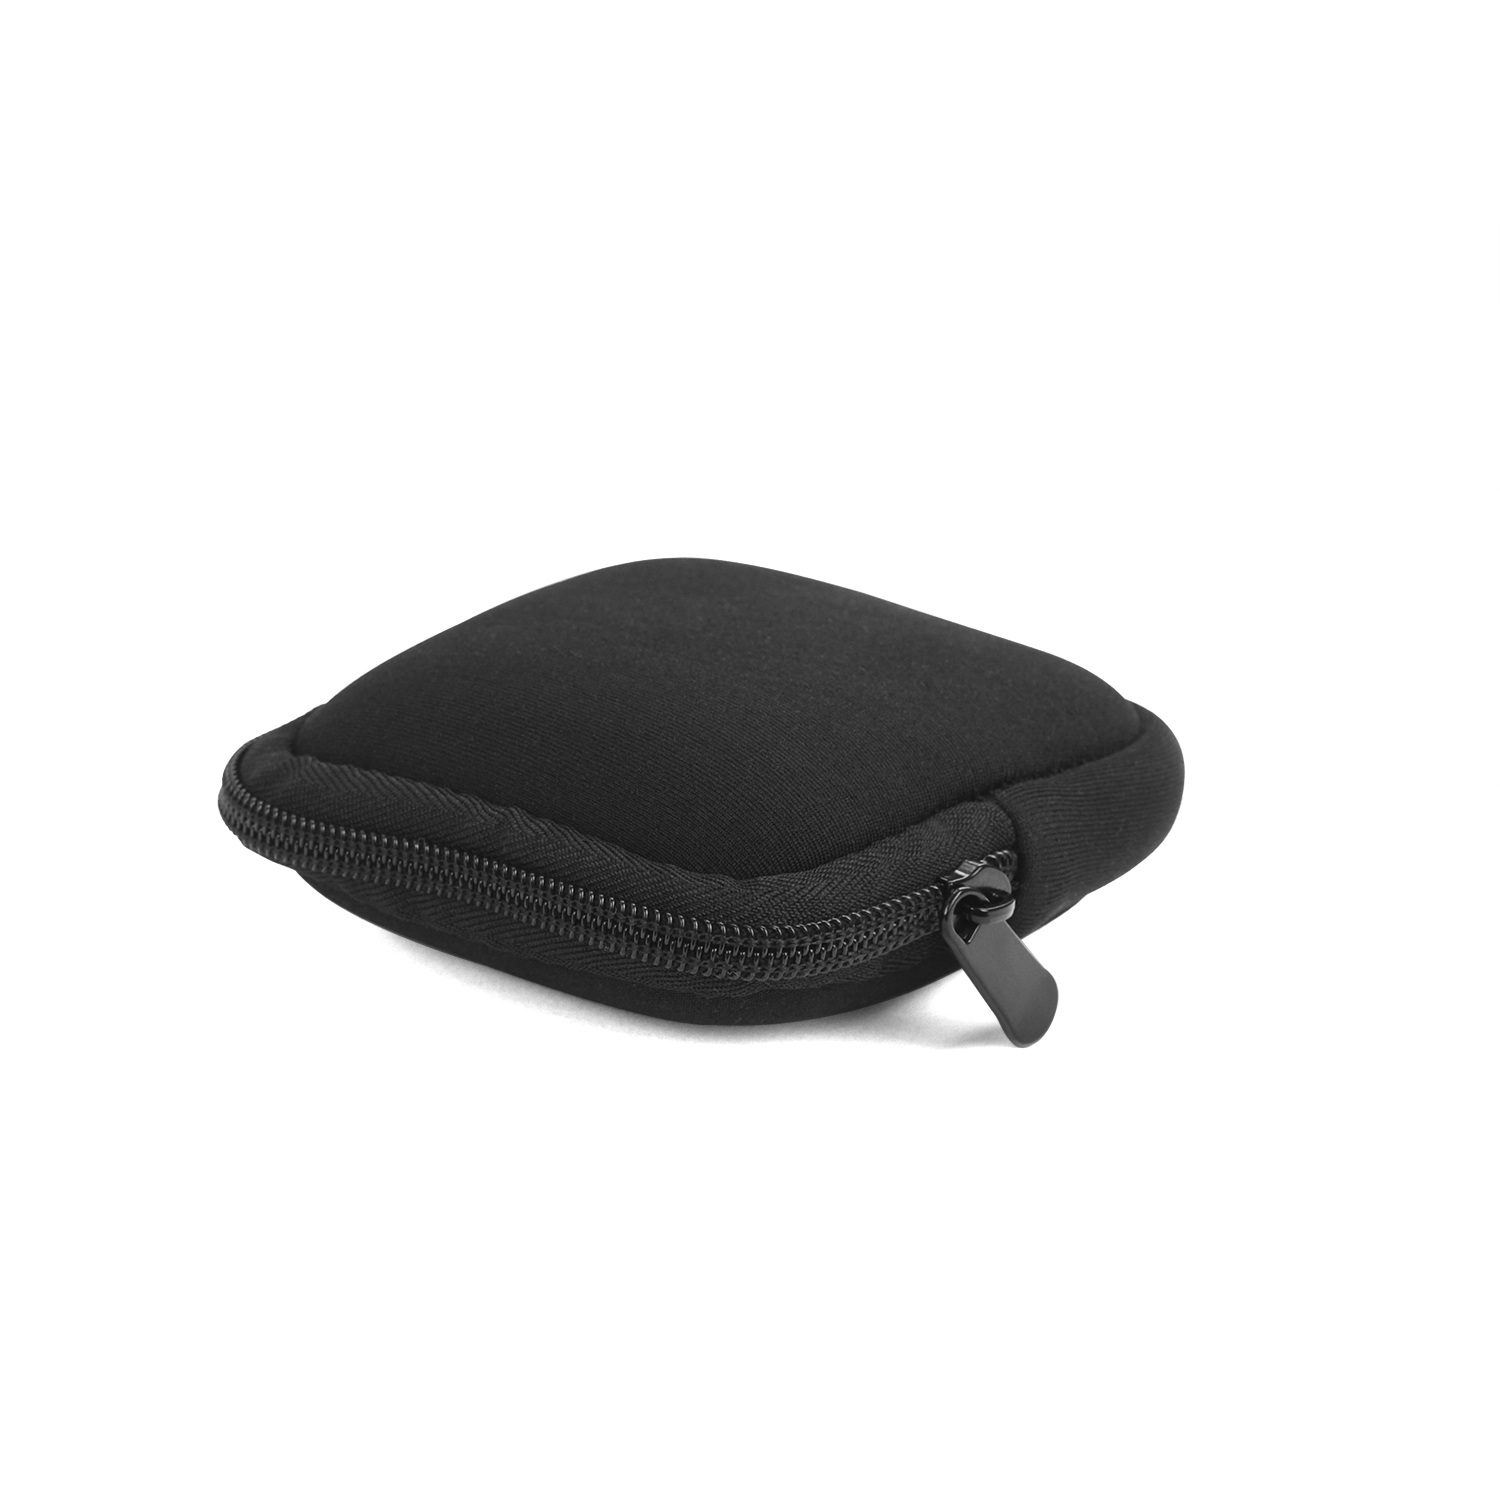 Bakeey-Earphone-Storage-Bag-Wireless-bluetooth-Headset-Protective-Carrying-Case-Dustproof-Portable-S-1800555-6